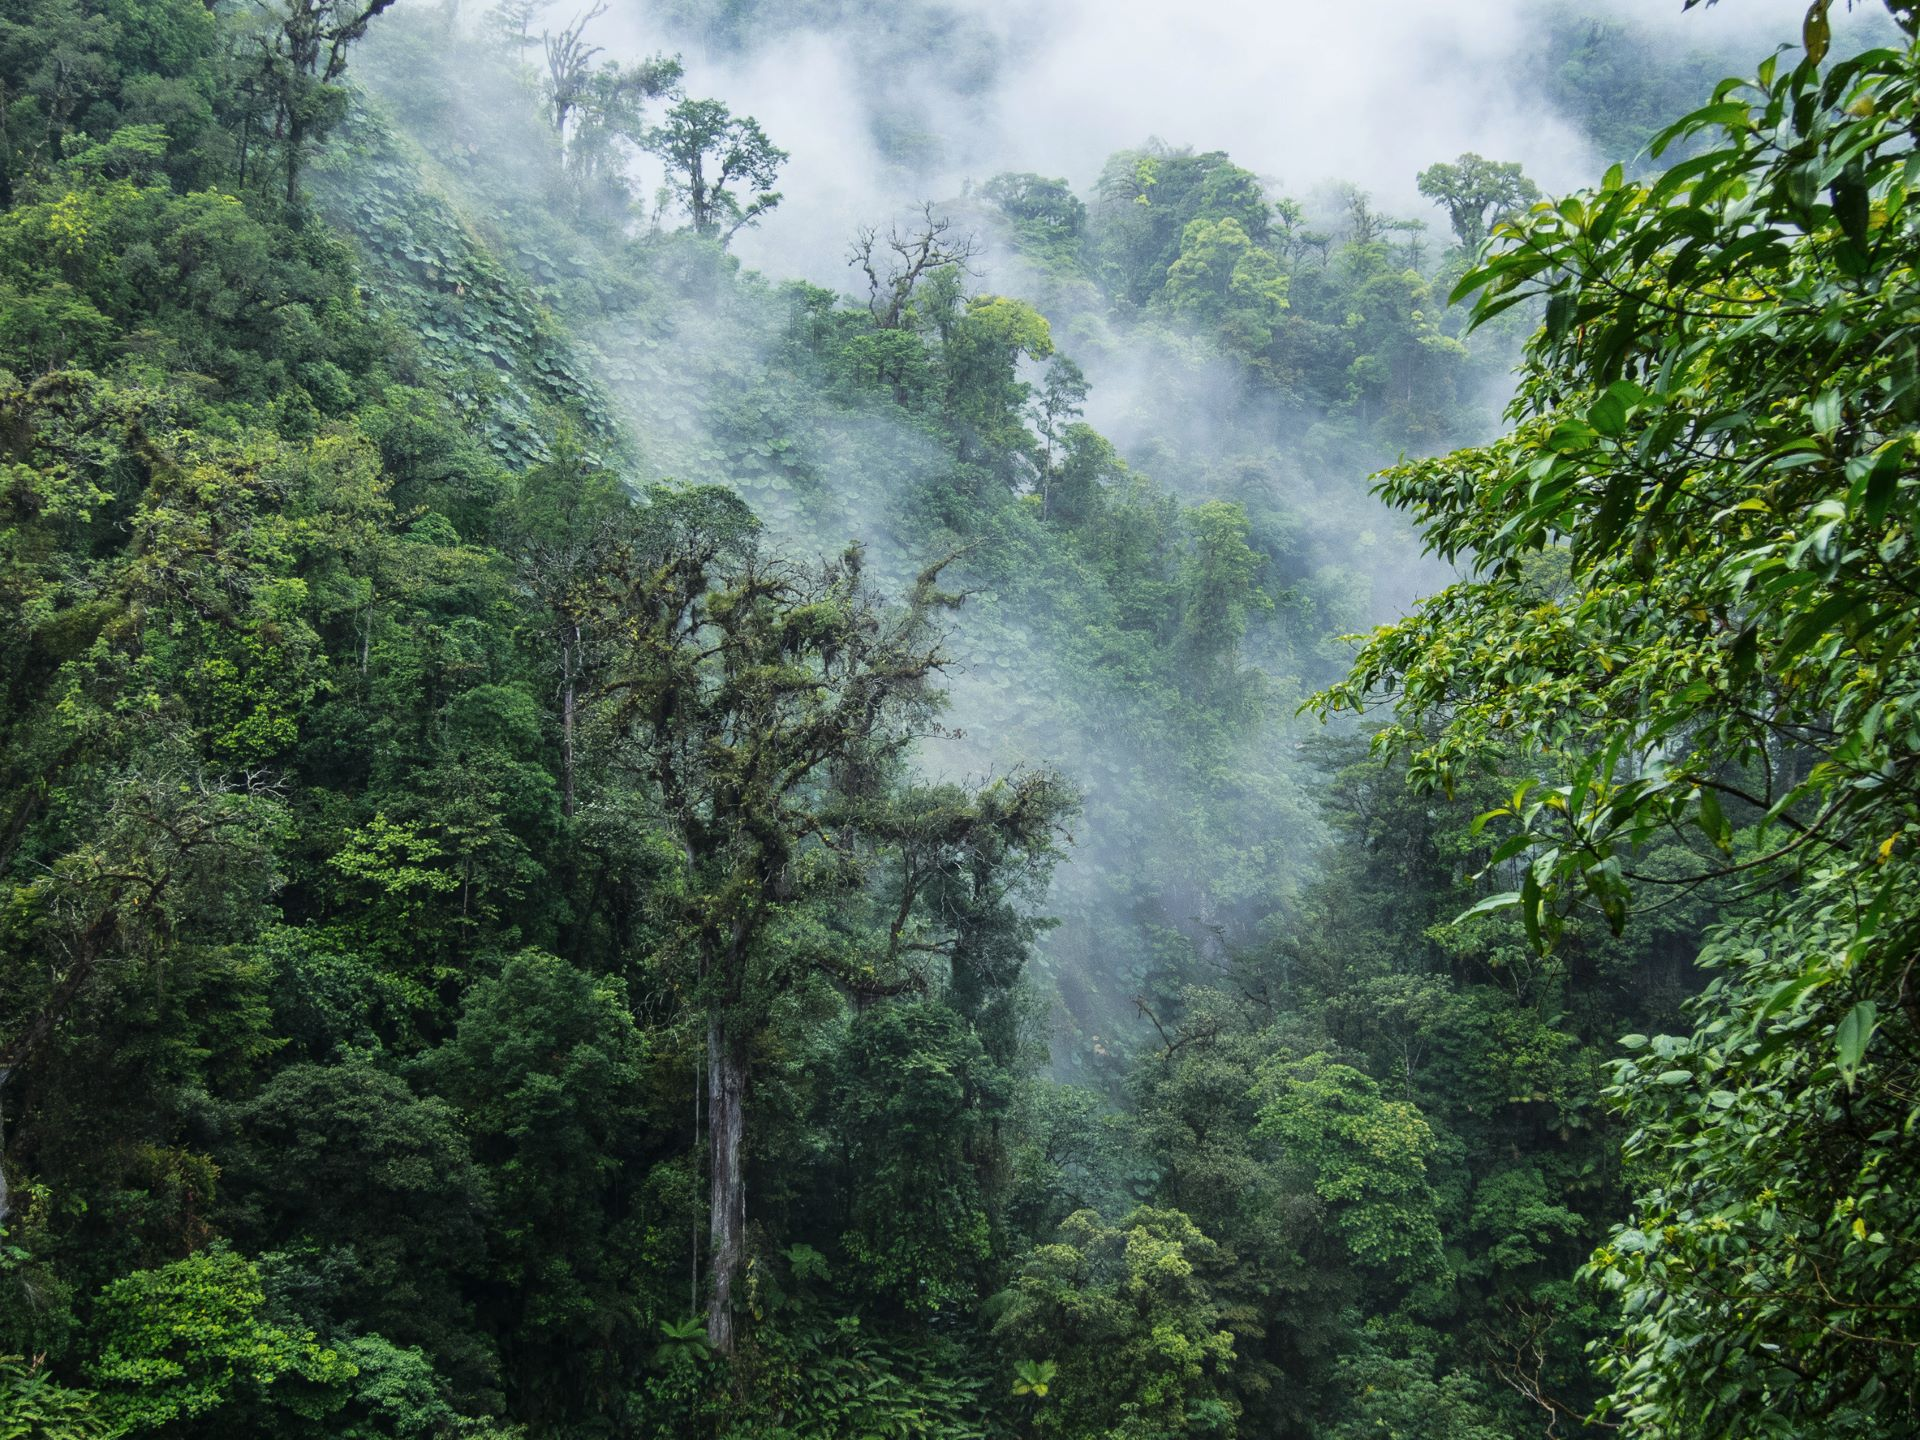 Monteverde is a destination that values sustainability and natural resources.